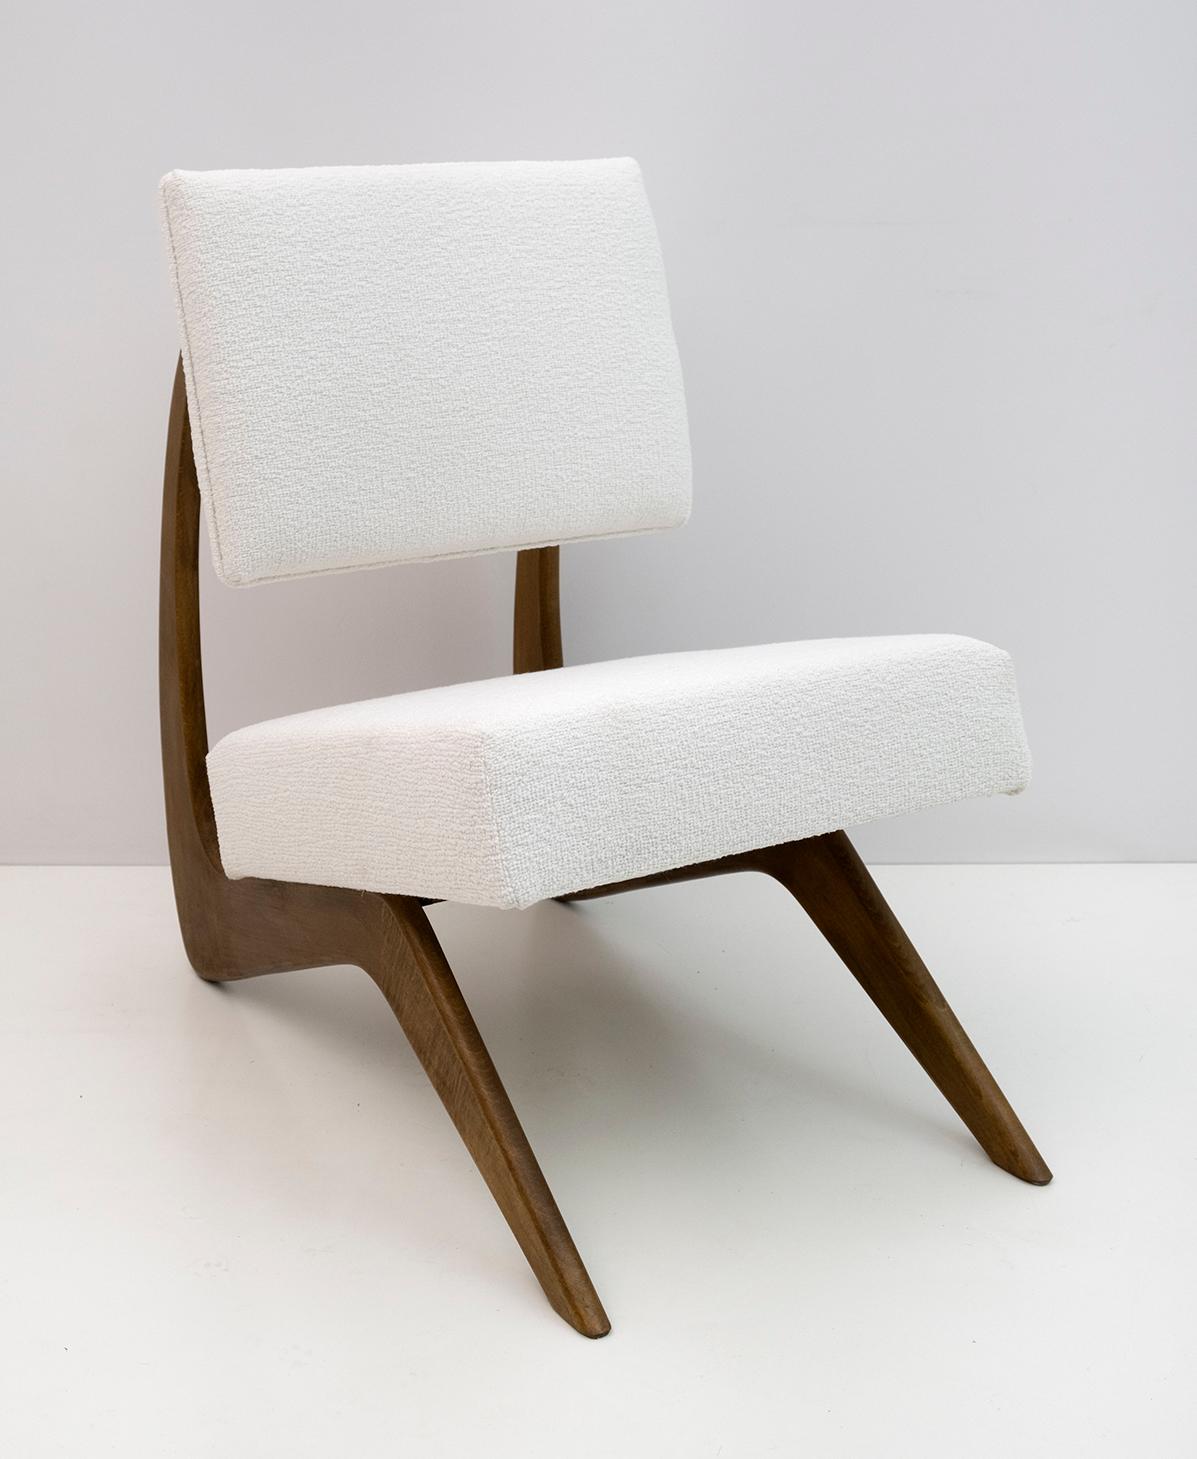 Armchair designed by the American designer Adrian Pearsall. The frame of this cocktail lounge chair is made of walnut wood in a beautiful curved shape and upholstered in white chenille fabric. The armchair has been restored and reupholstered.